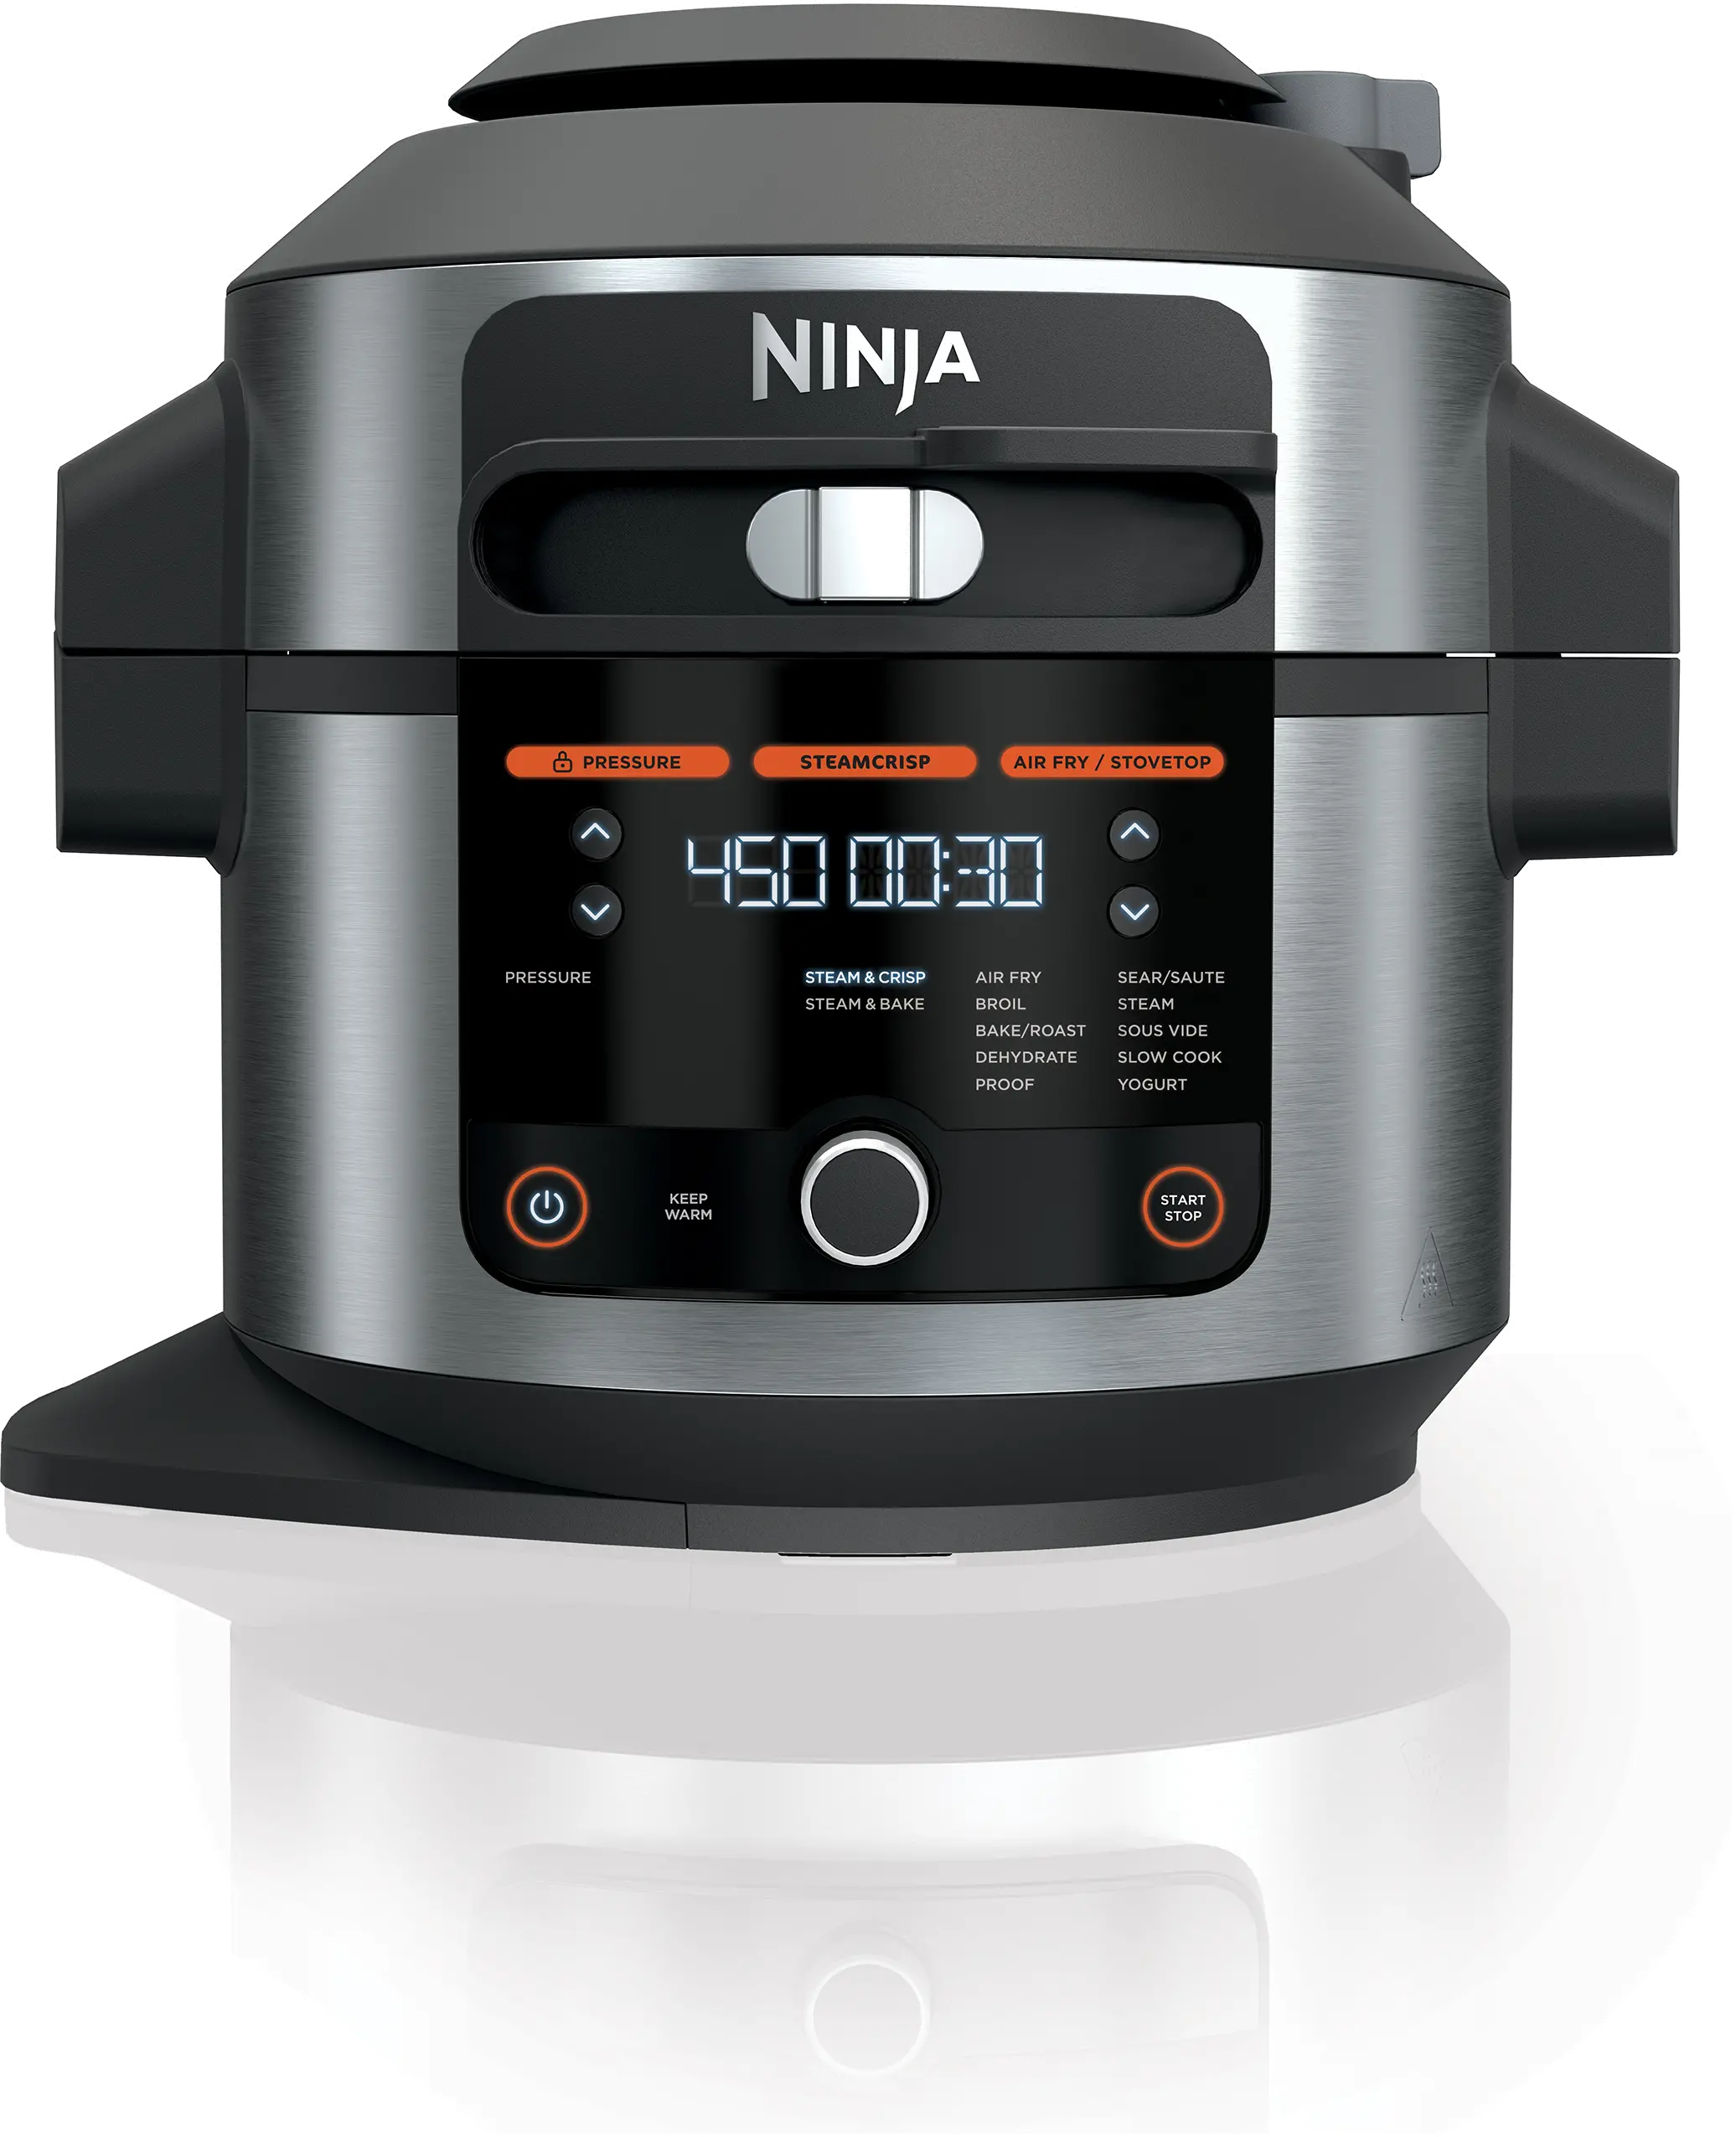 https://static.rcwilley.com/products/113343582/Ninja-Foodi-14-in-1-Pressure-Cooker-Steam-Fryer-with-SmartLid-rcwilley-image1.webp